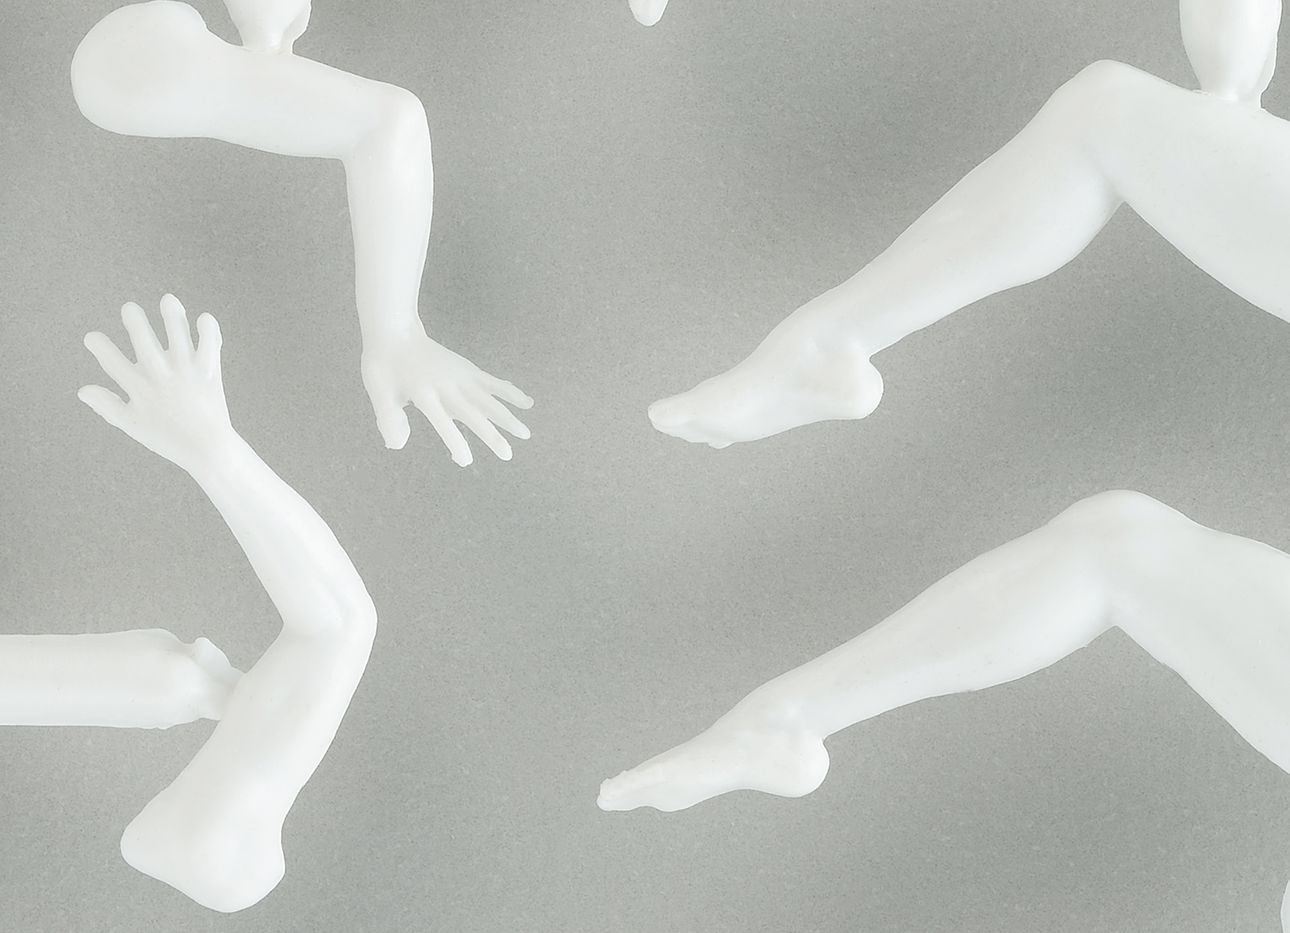 Disembodied plastic limbs on a grey background.